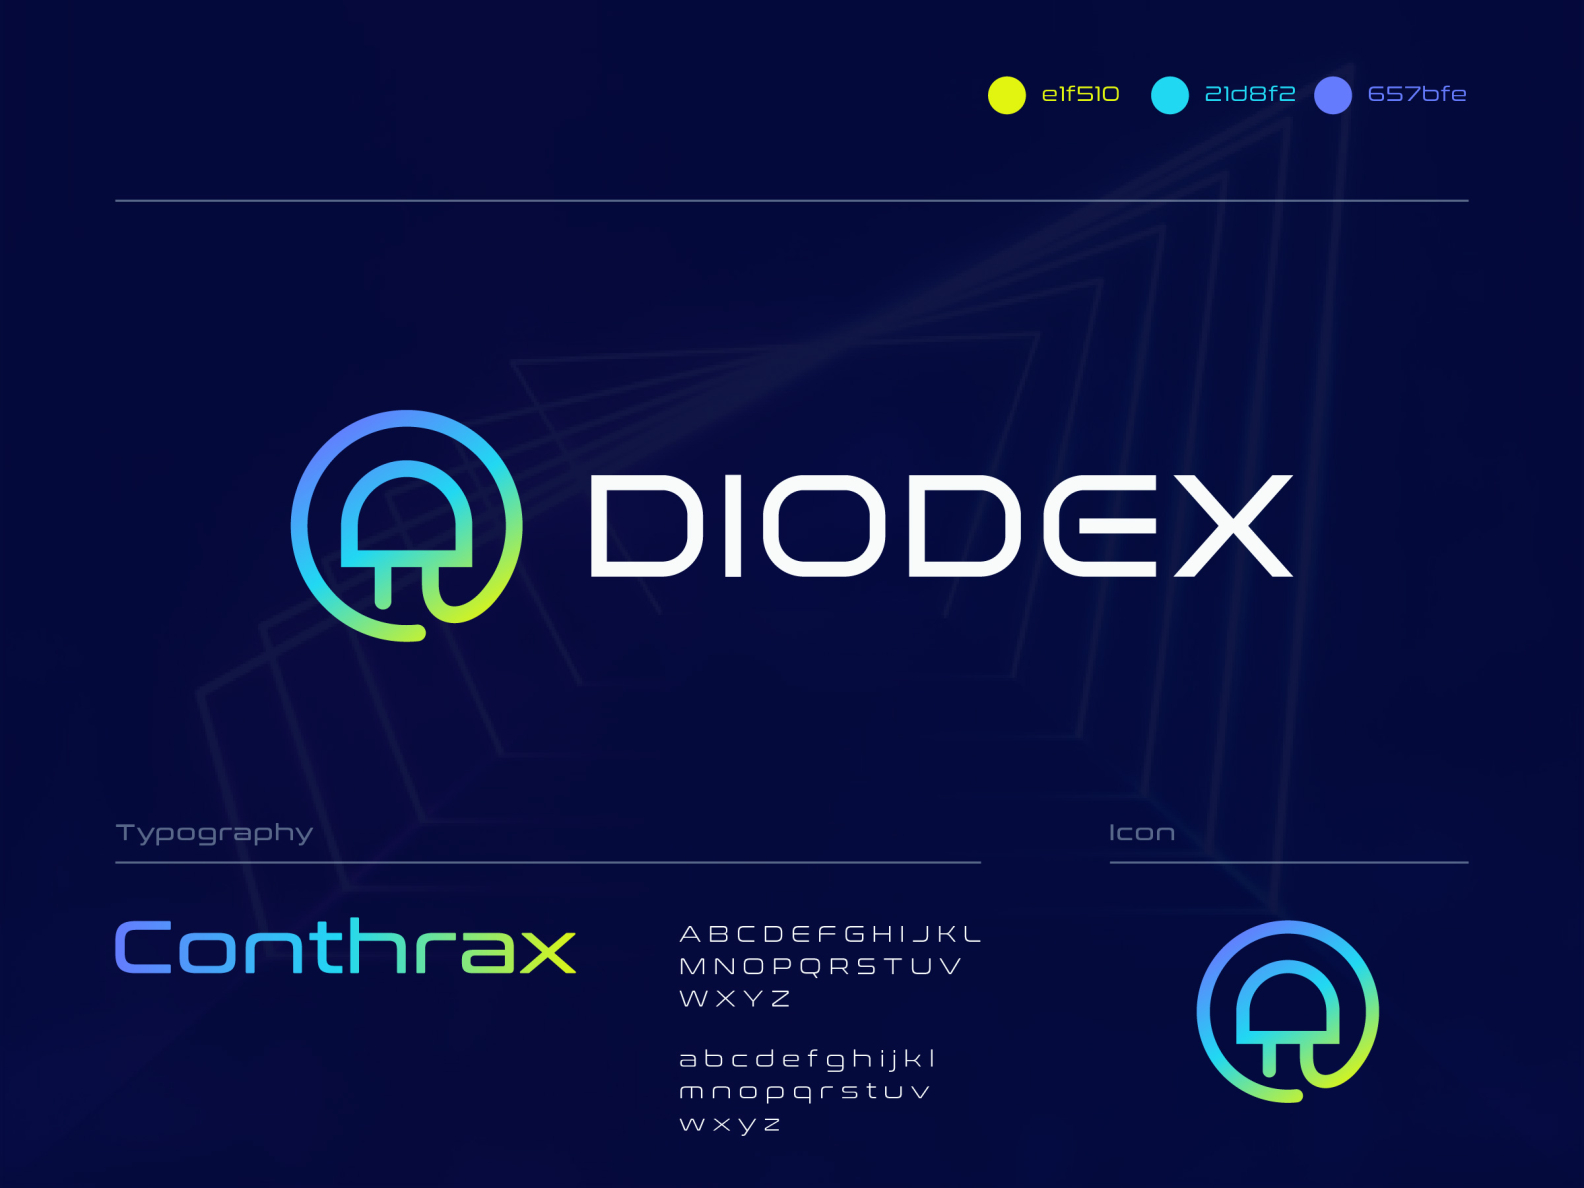 Diodex by asif iqbal | logo and branding expert on Dribbble